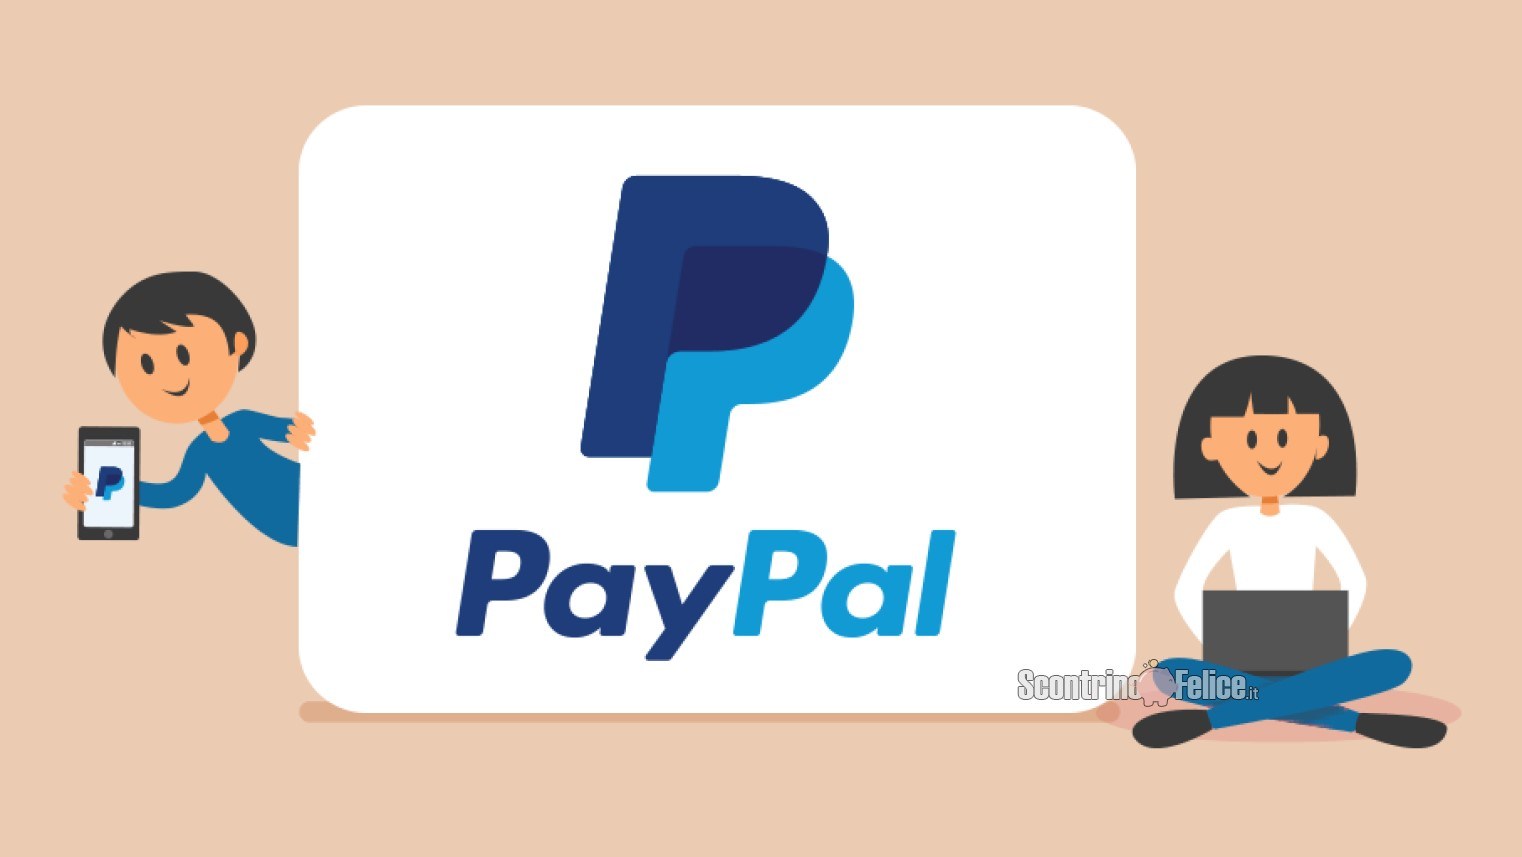 PayPal Paga in 3 rate